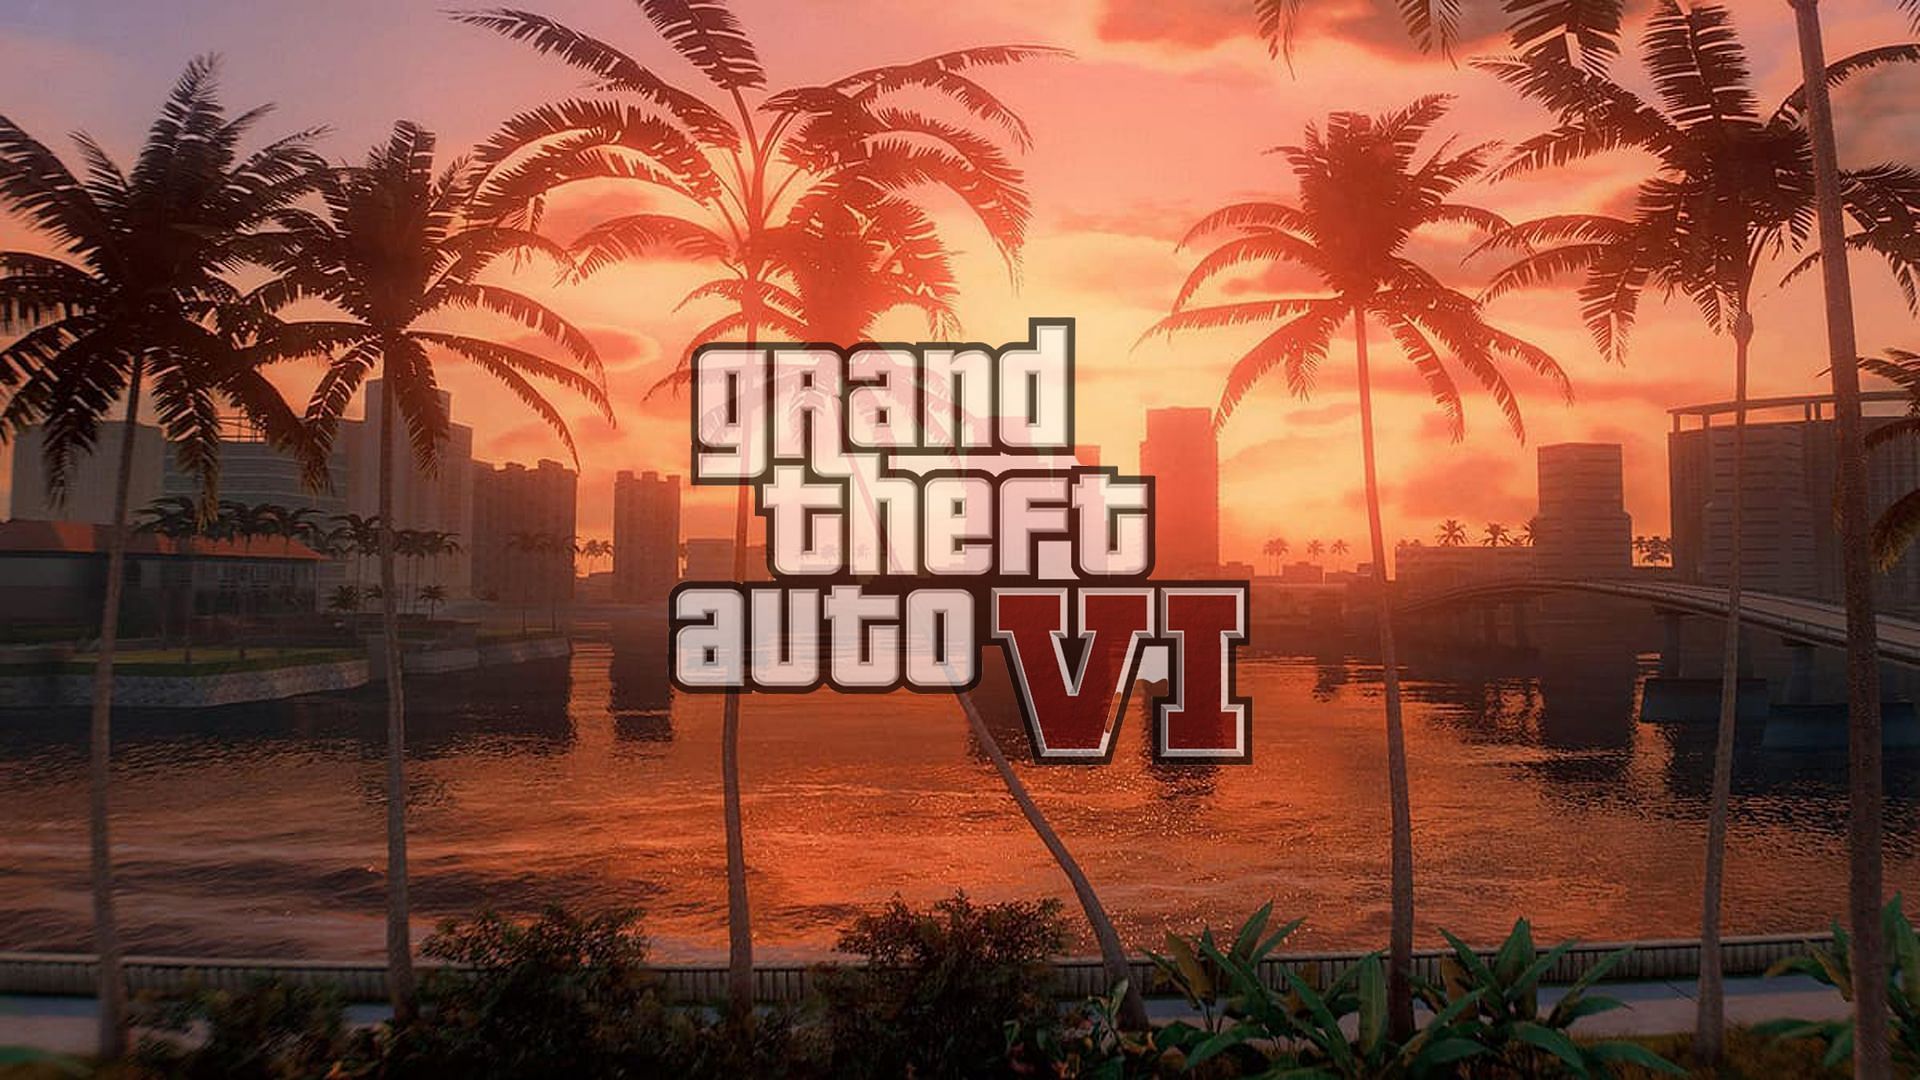 Vice City is the most wanted location for the next Rockstar title (Image via GTAForums)